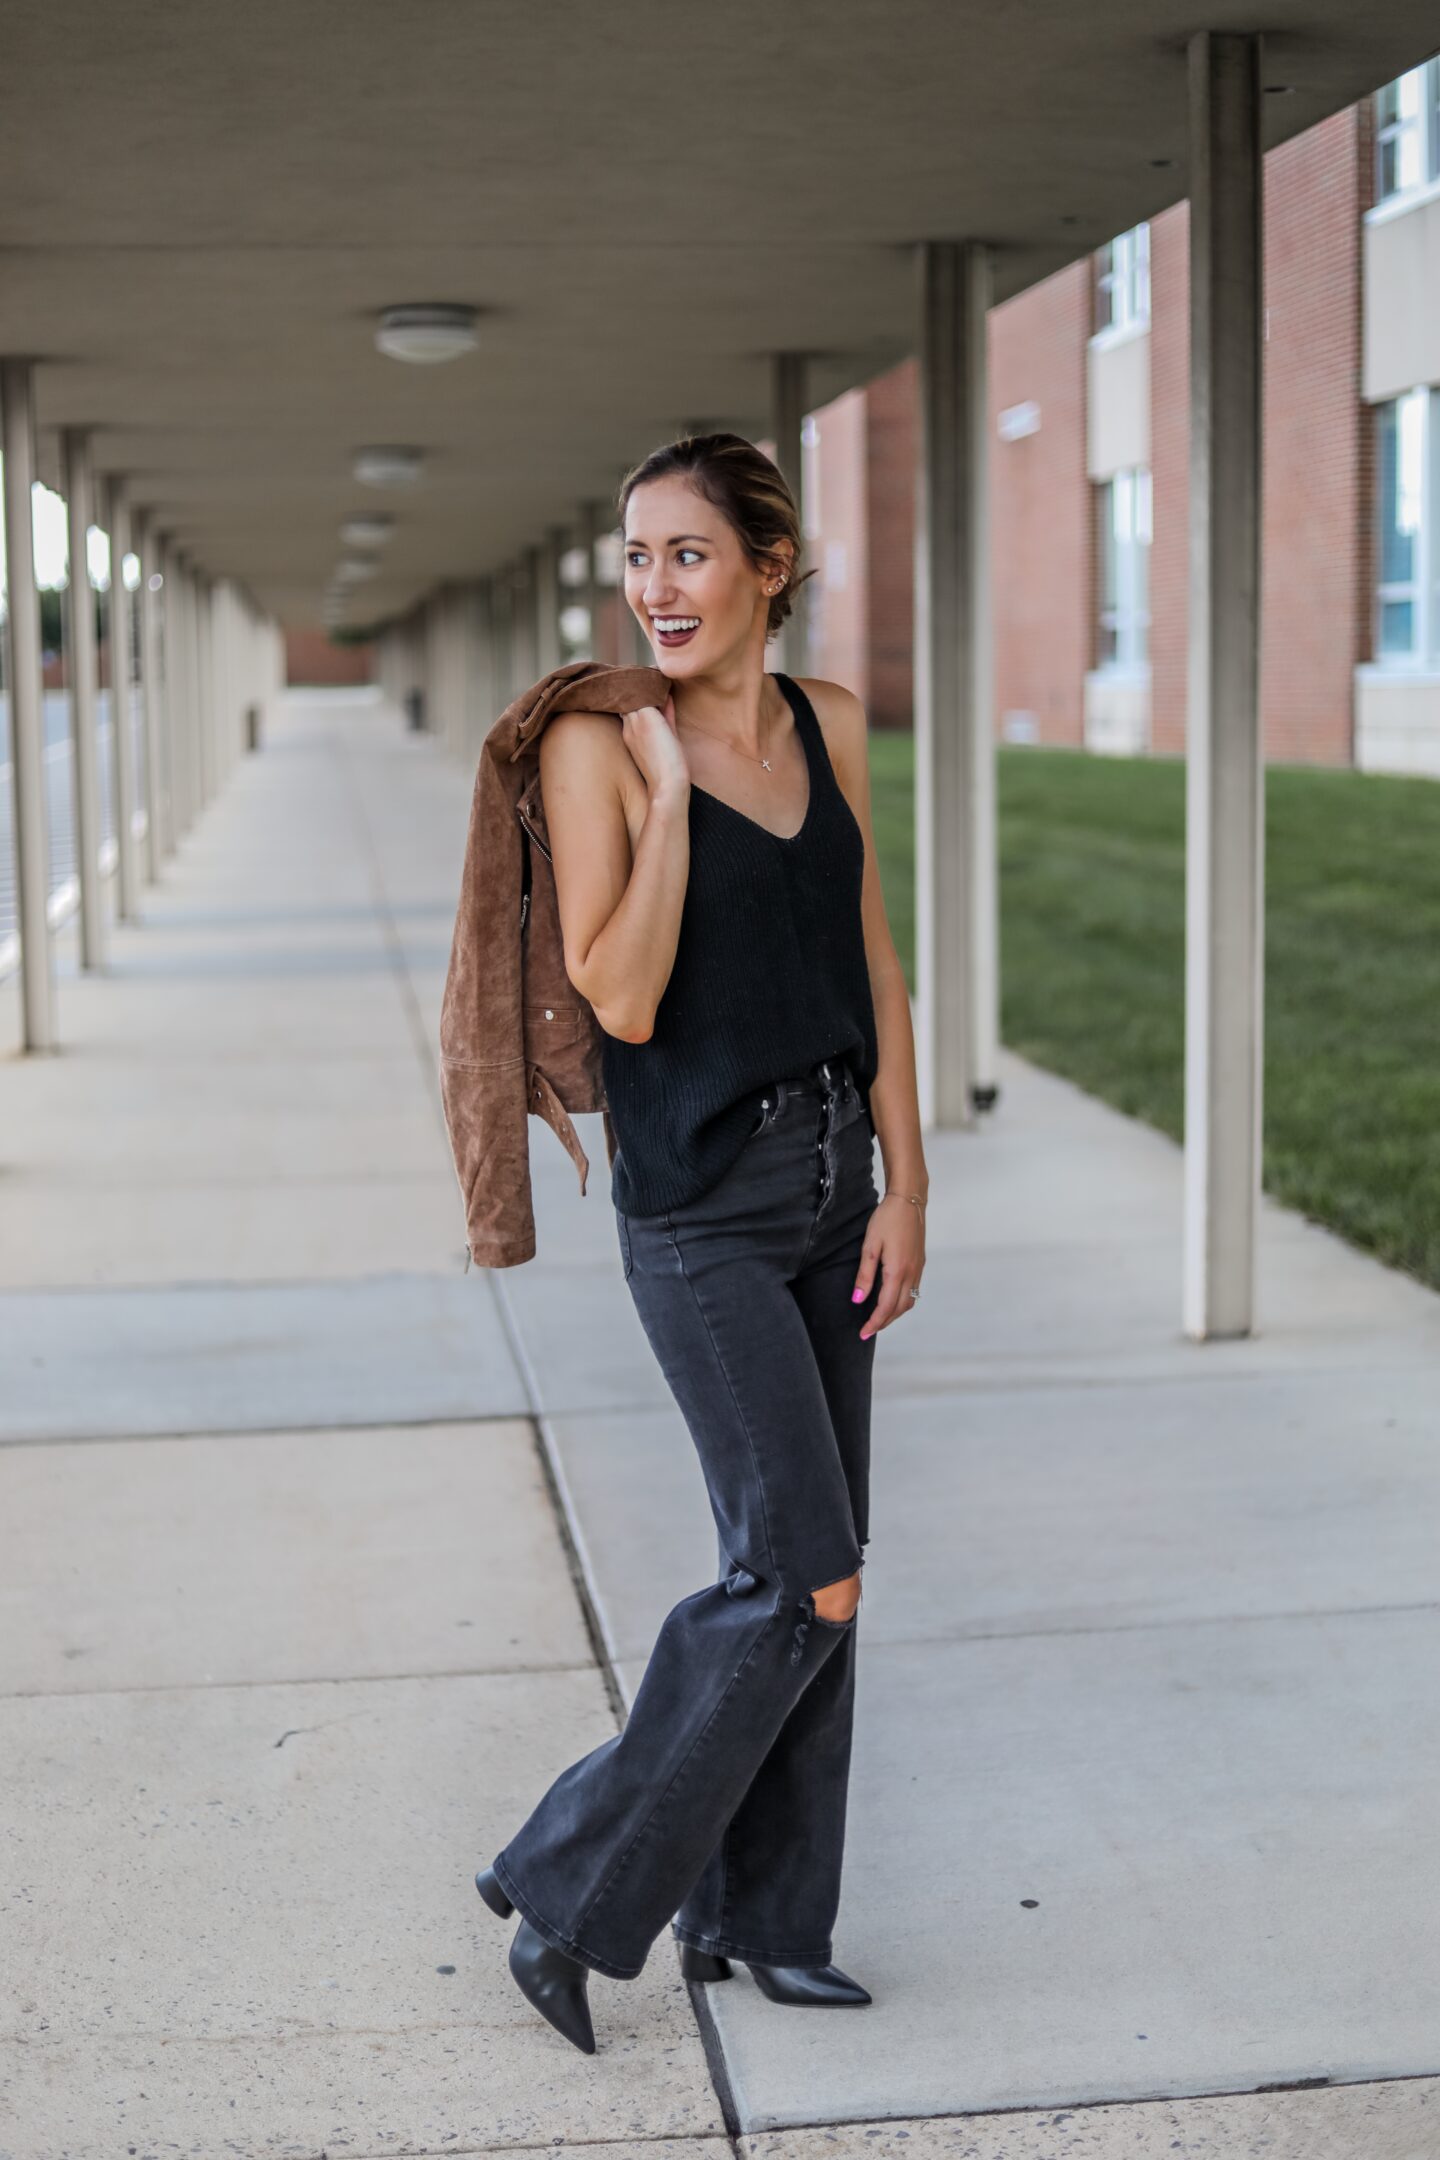 Styling a sweater tank from summer to fall - Transitional outfit idea on Coming Up Roses